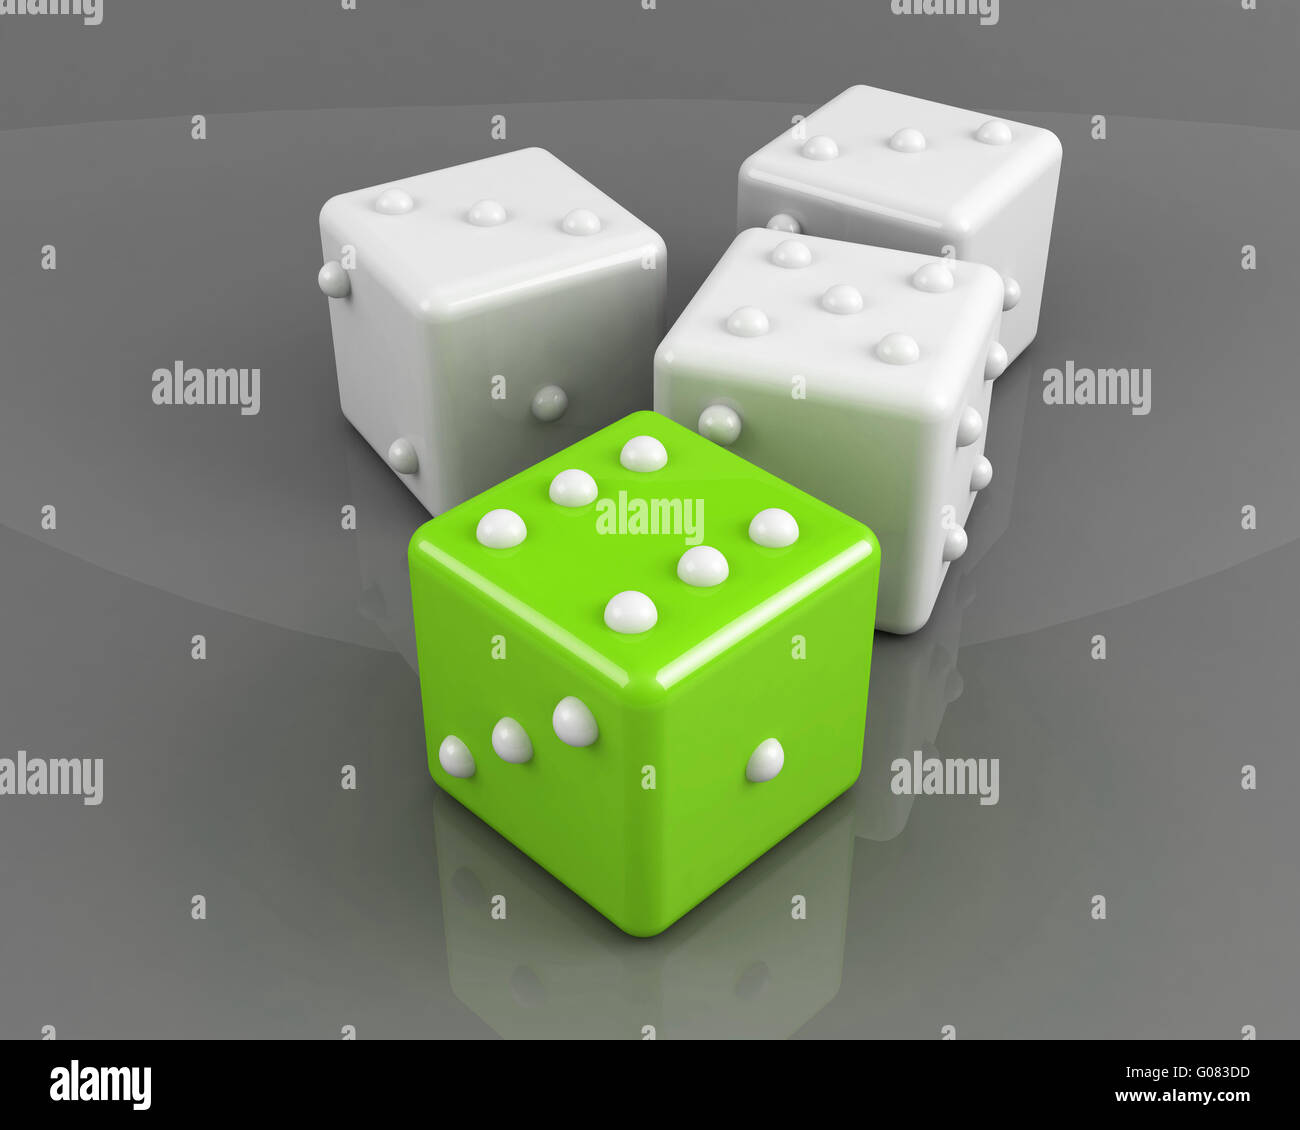 green winning dice on the grey background concept Stock Photo